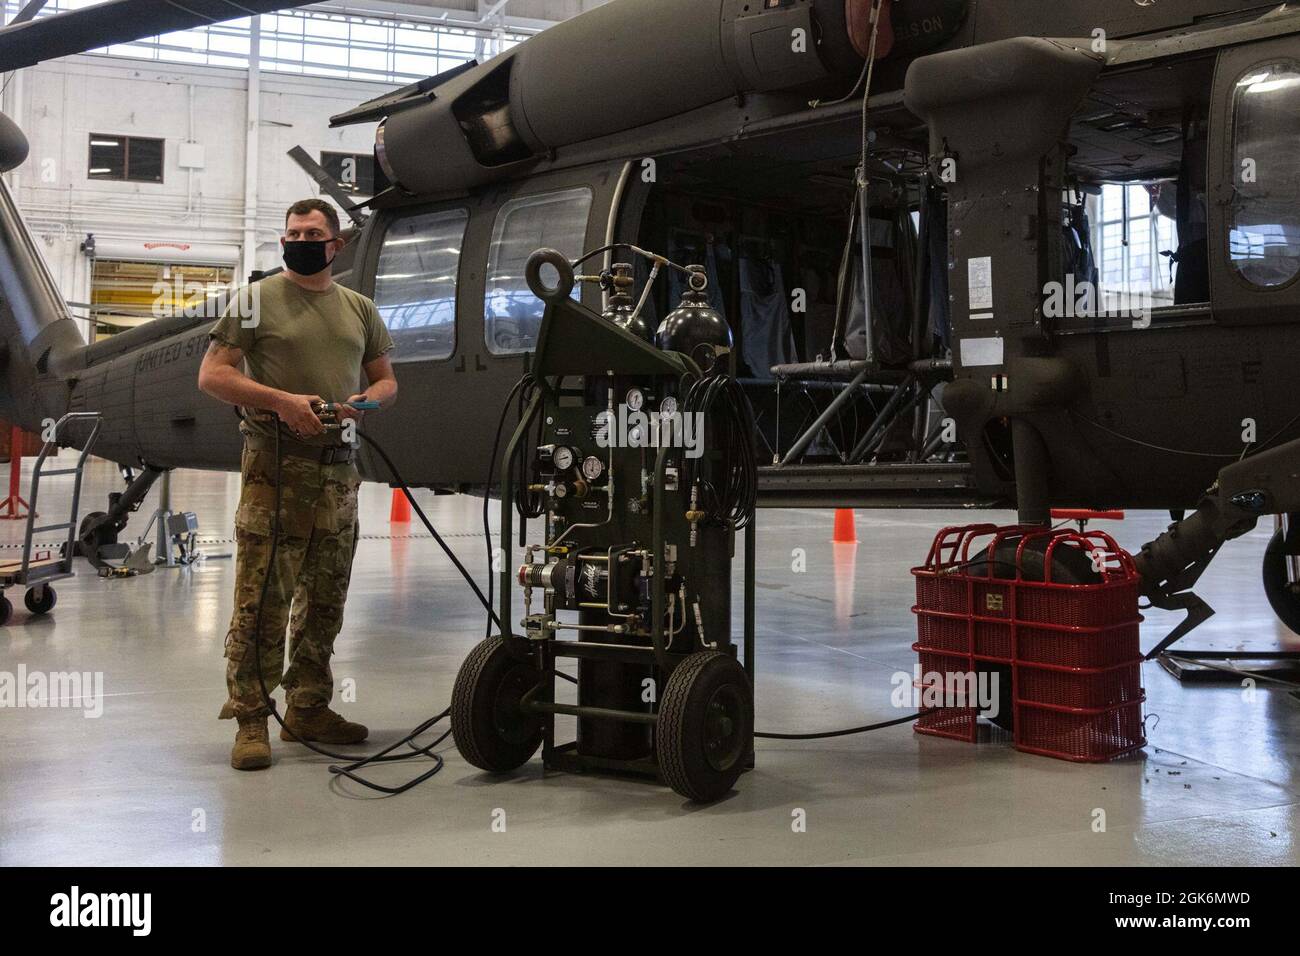 U.S. Army Sgt. Kris Whitworth, an aircraft mechanic with Alpha Company 1st General Support Aviation Battalion 171st Aviation Regiment, Georgia Army National Guard, inflates the tire of a Black Hawk helicopter during routine maintenance at Clay National Guard Center in Marietta, Georgia. Georgia Army National Guard aviation units are among the most frequently deployed in the state and region supporting multiple training exercises with the Georgia National Guard, as well as emergency response missions at such as hurricane relief operations, COVID-19 pandemic and supporting overseas combat missio Stock Photo